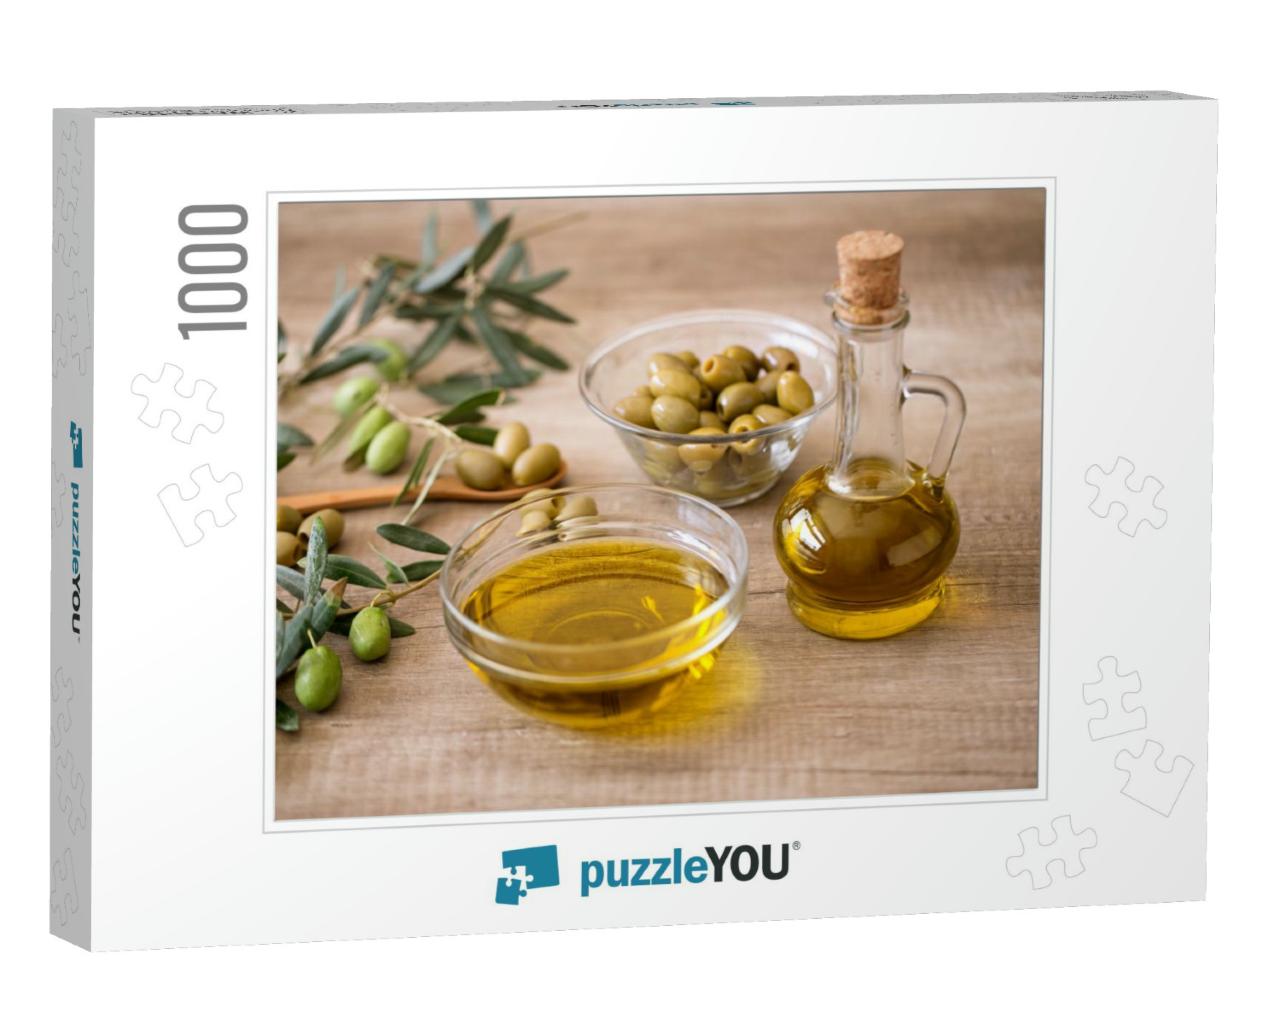 Extra Virgin Healthy Olive Oil with Fresh Olive on Wooden... Jigsaw Puzzle with 1000 pieces